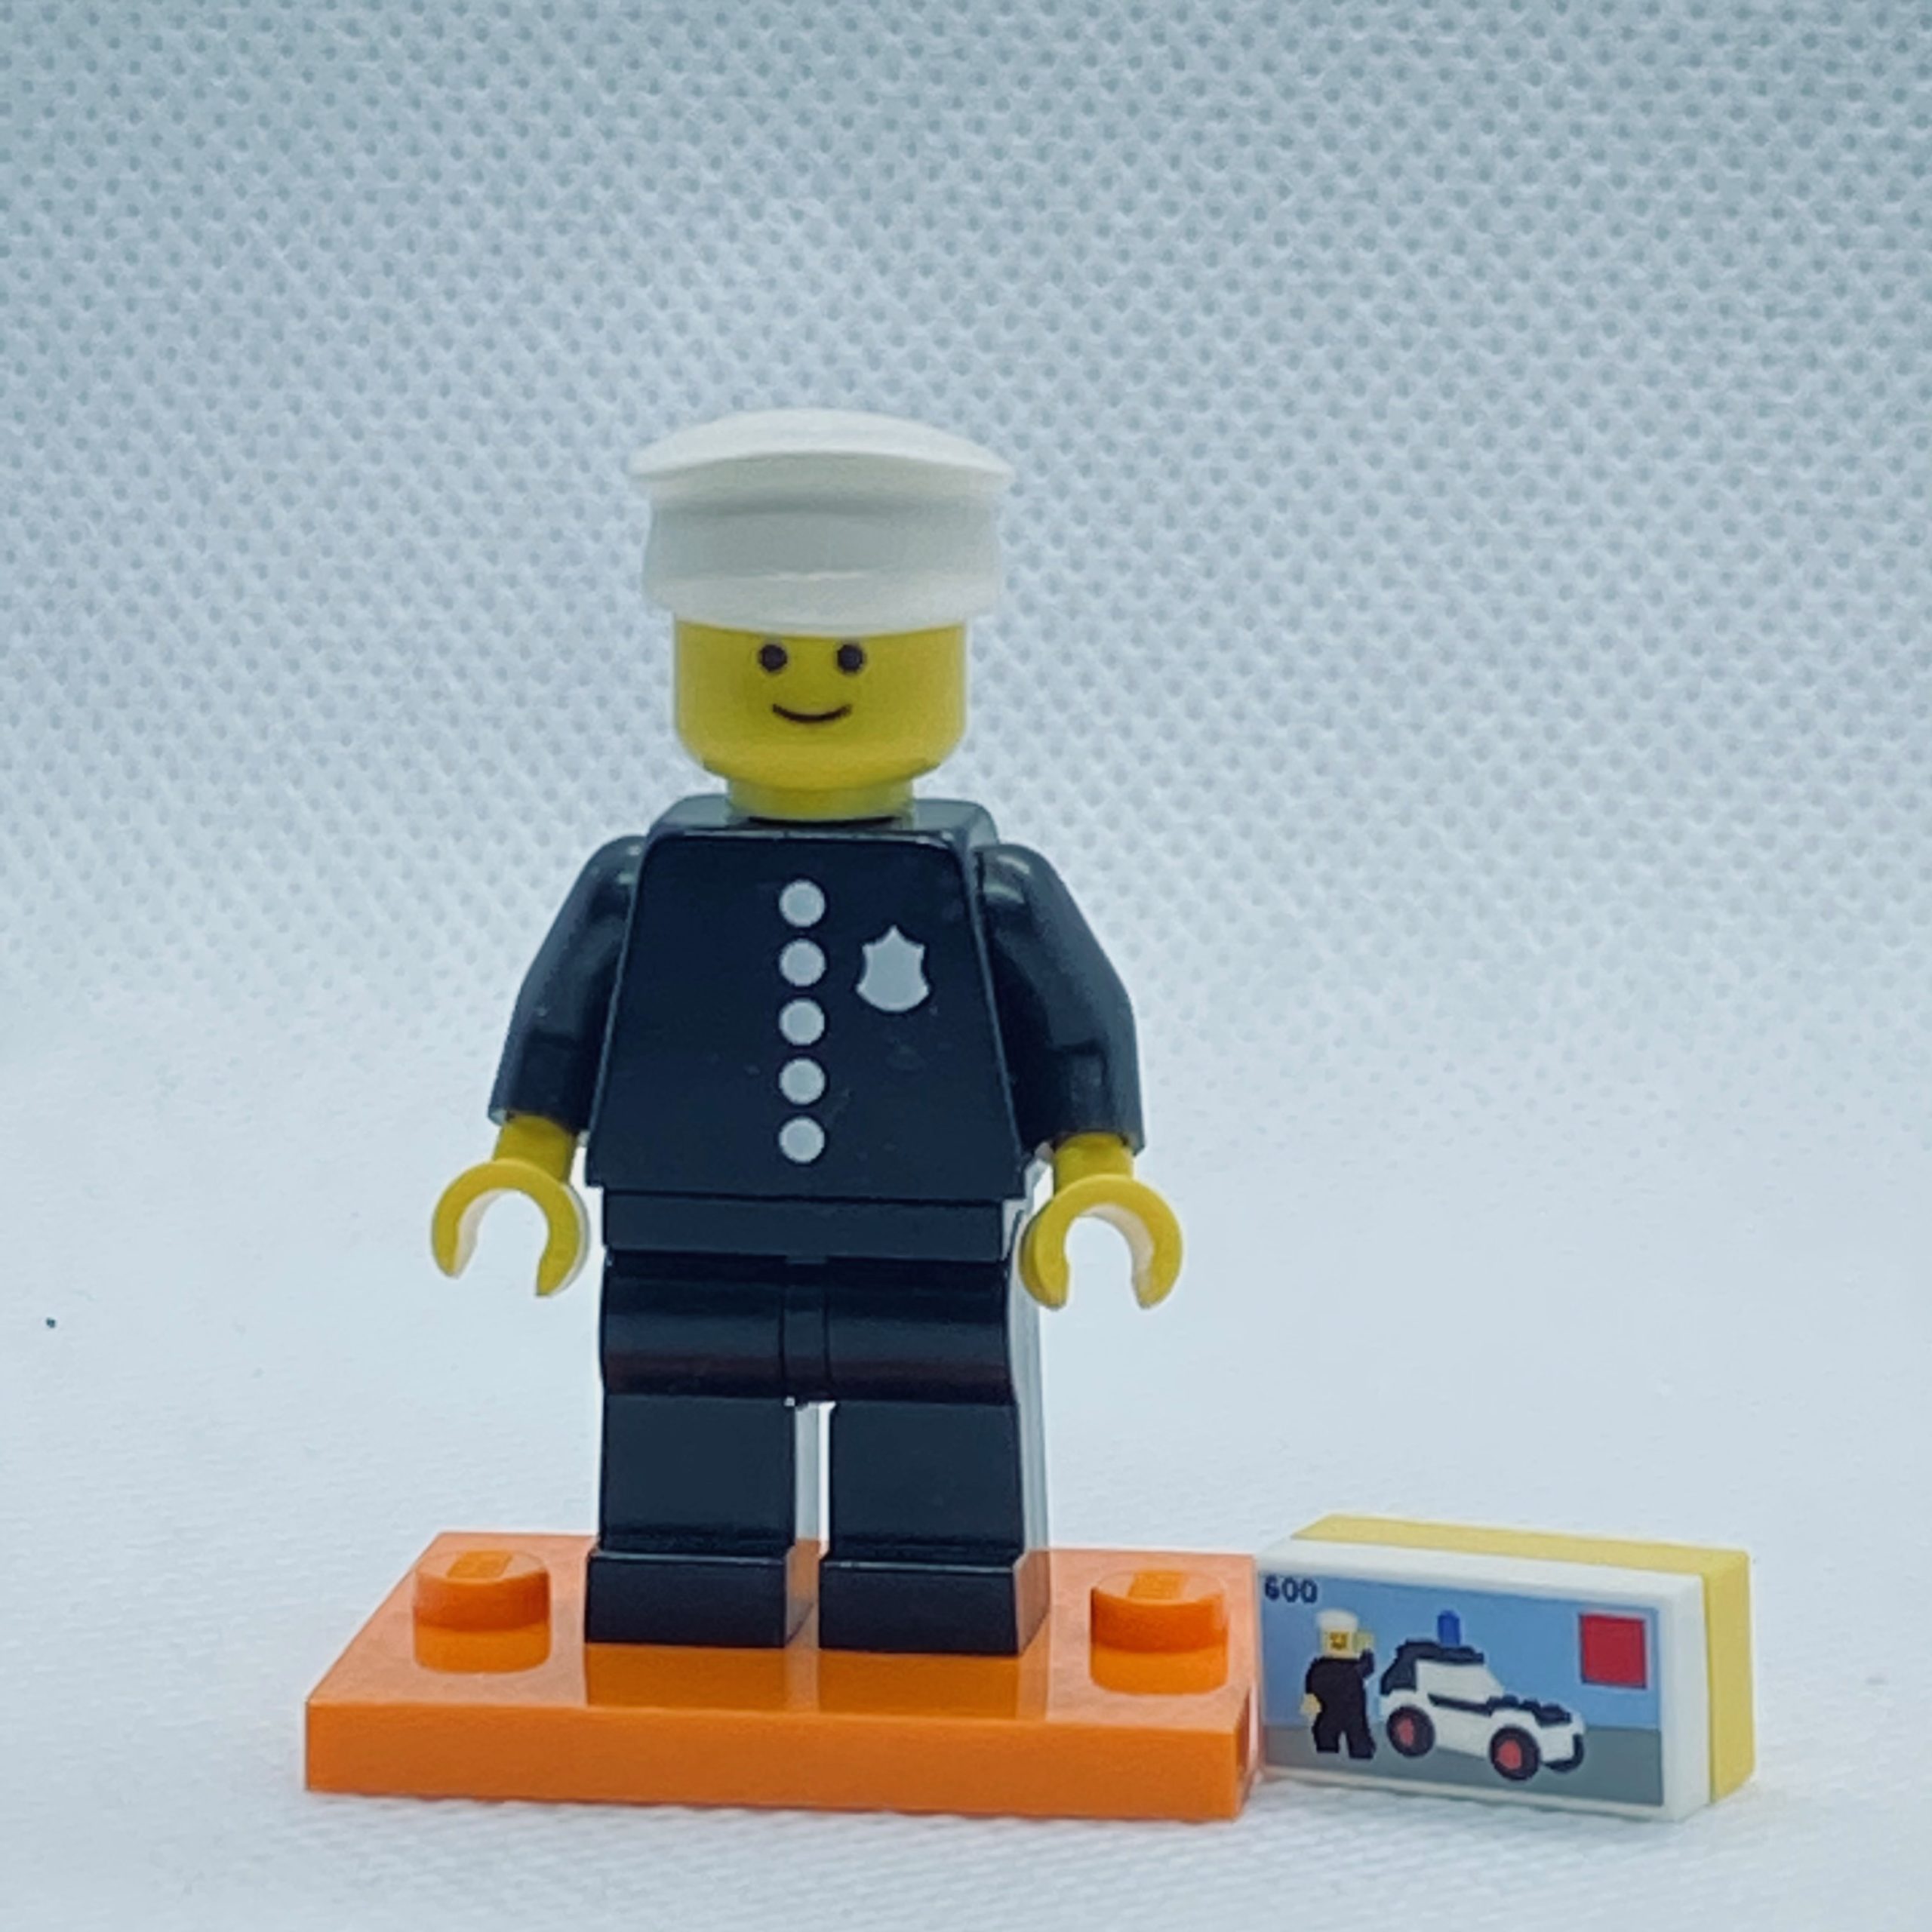 LEGO 71021 CMF Series 18 Minifigures 1978 Classic Police Officer Brick Land